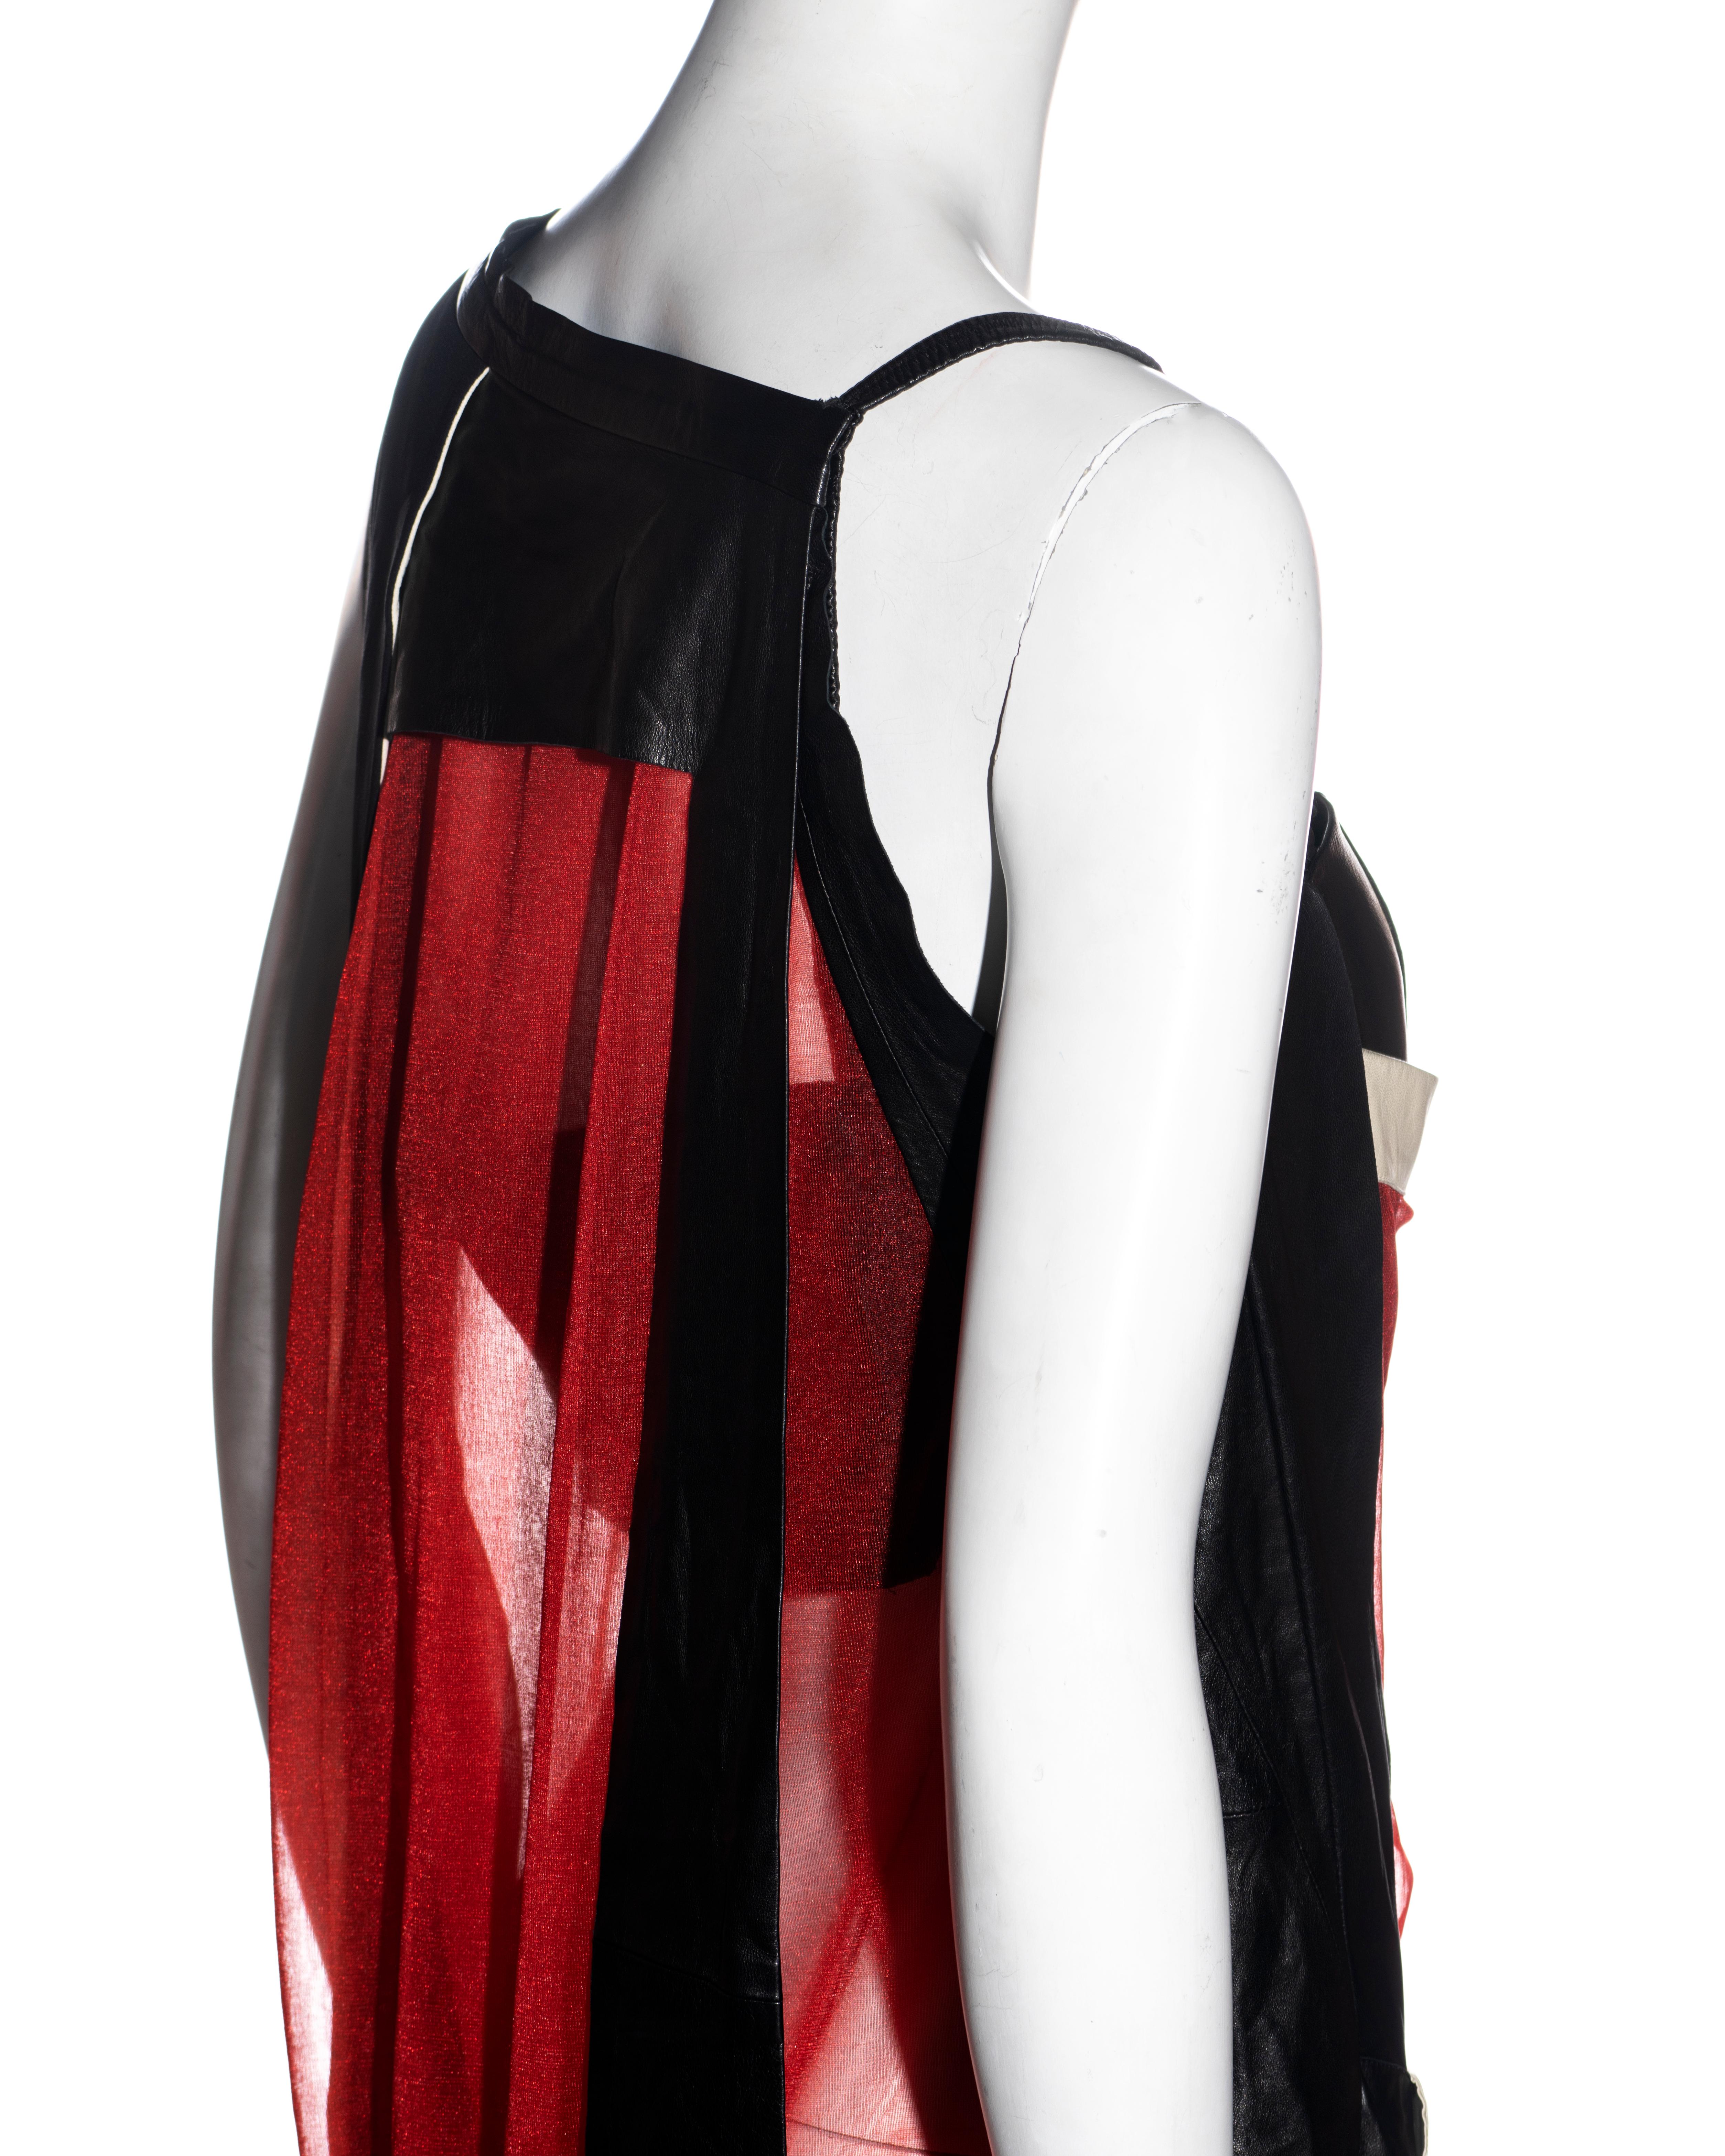 Balenciaga by Nicolas Ghesquière black and red leather mini dress, ss 2010 For Sale 5